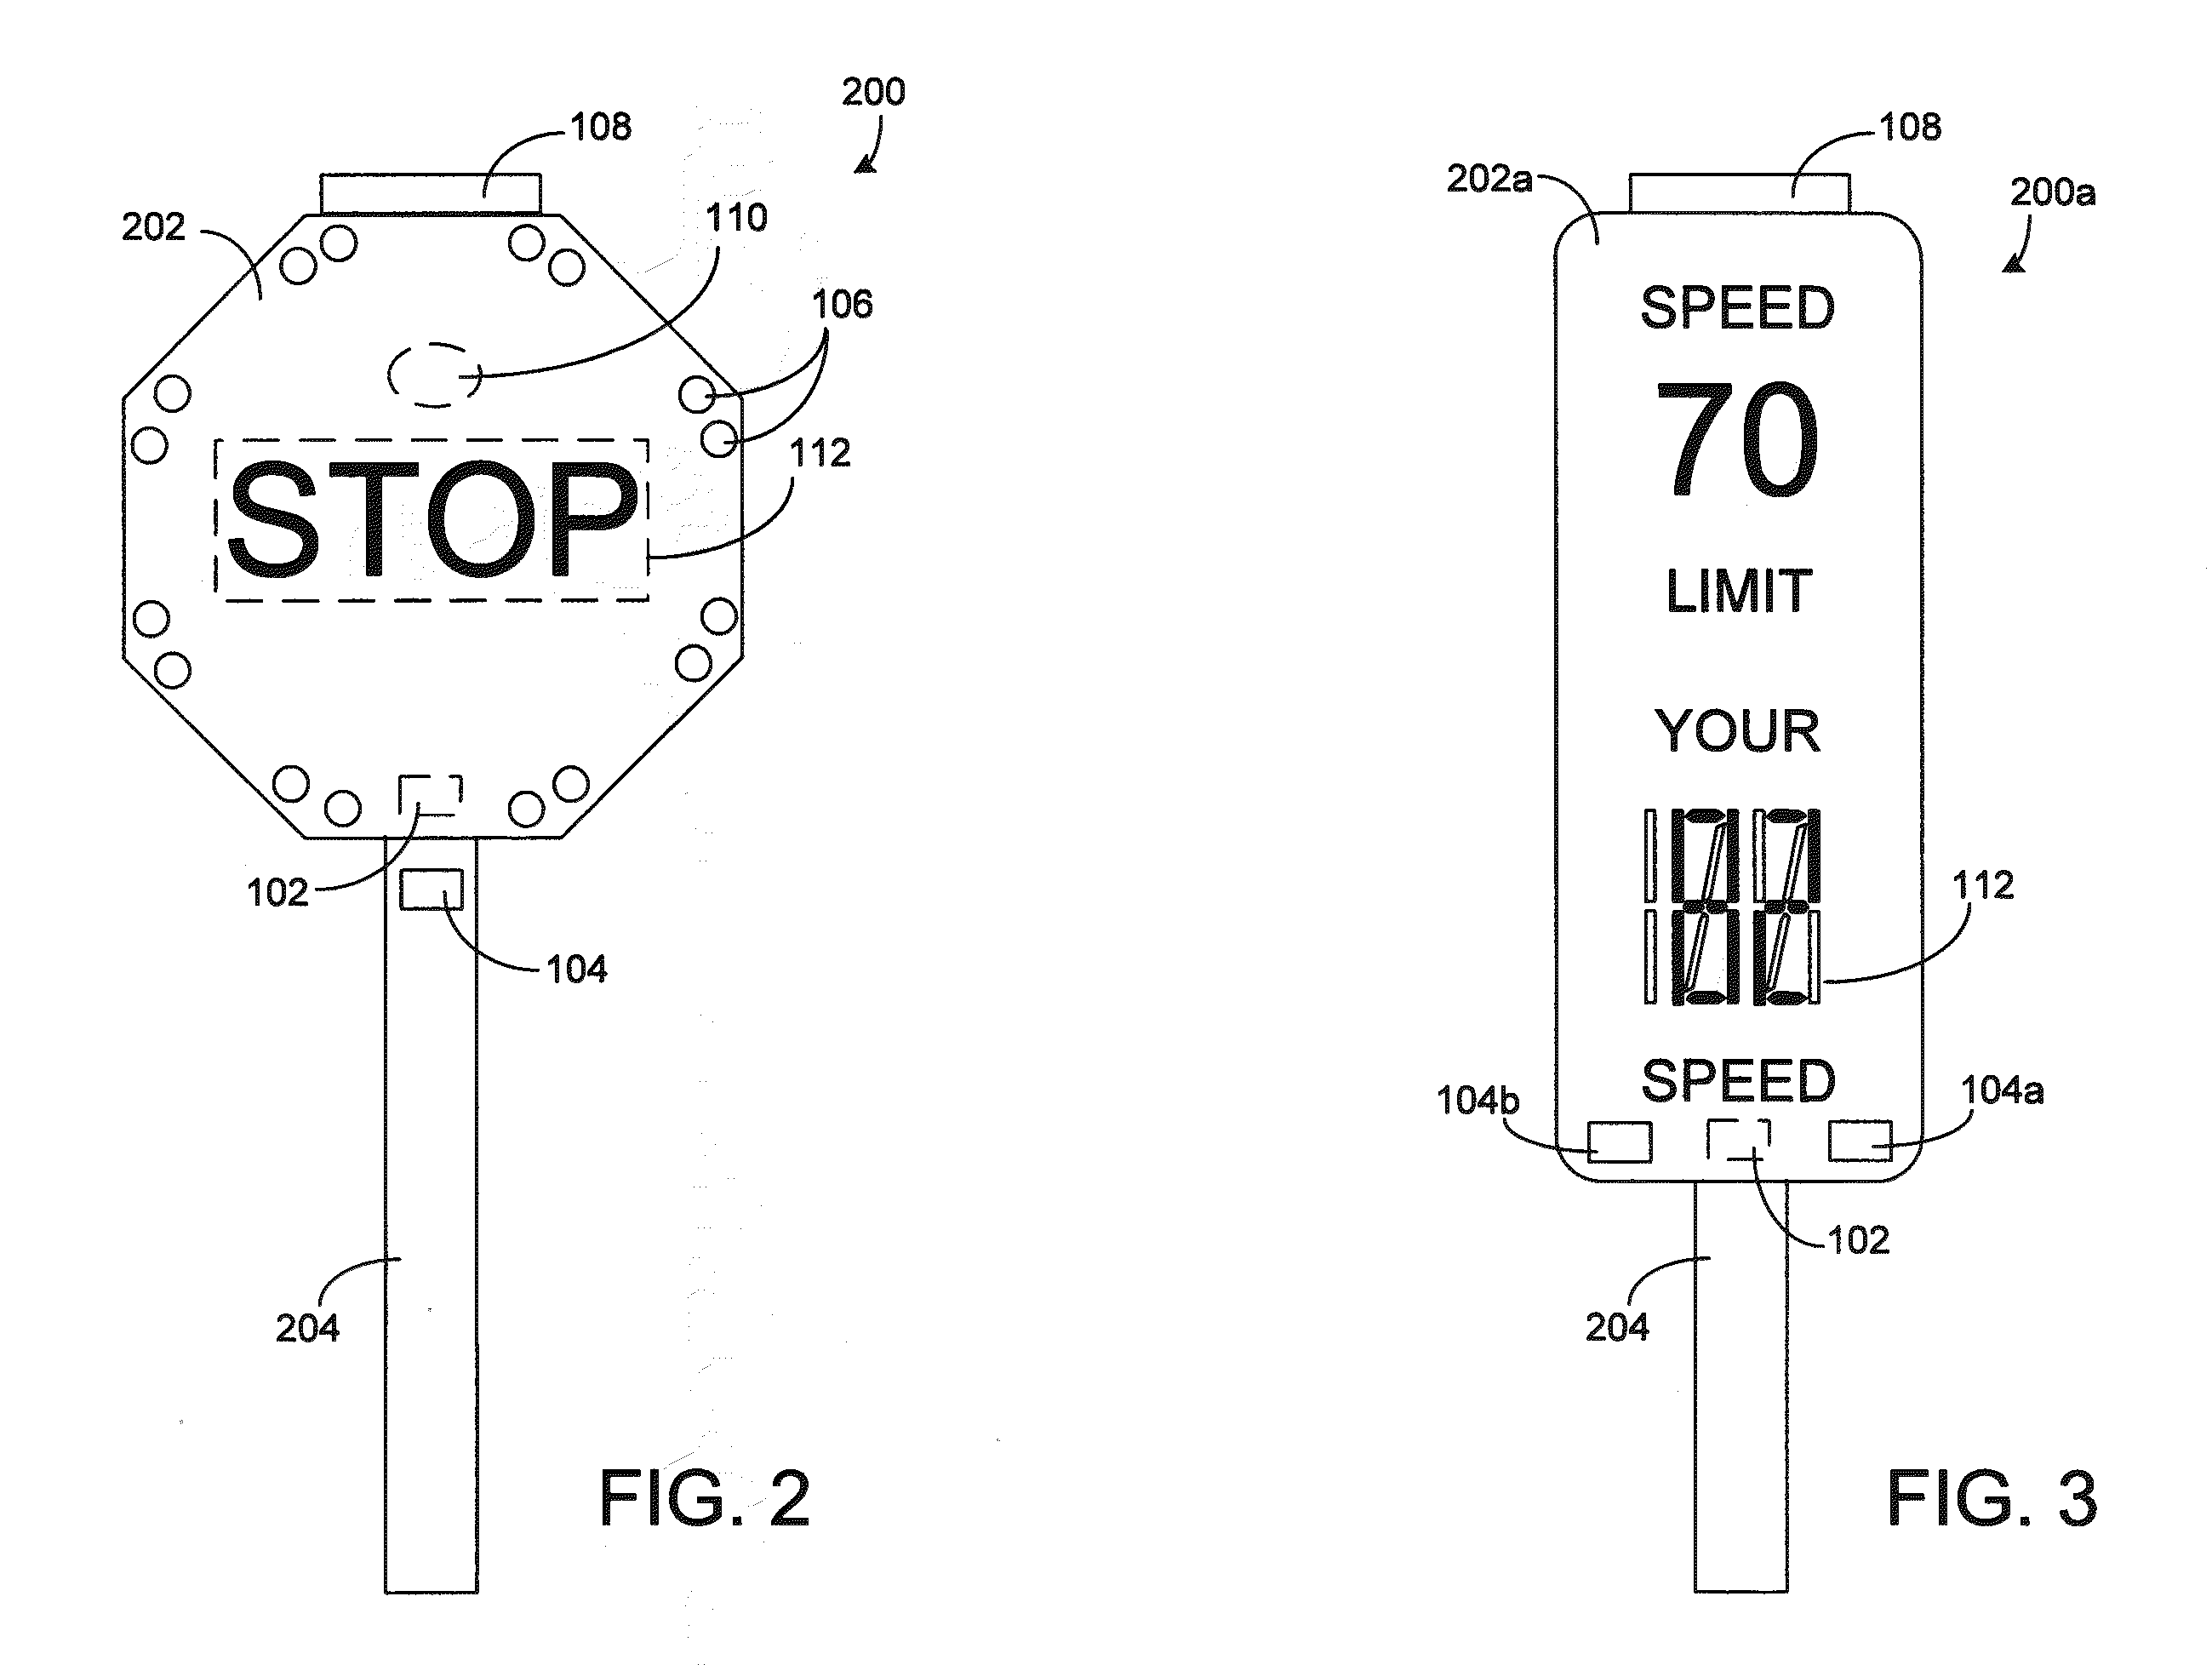 Blind spot detection system and method using preexisting vehicular imaging devices